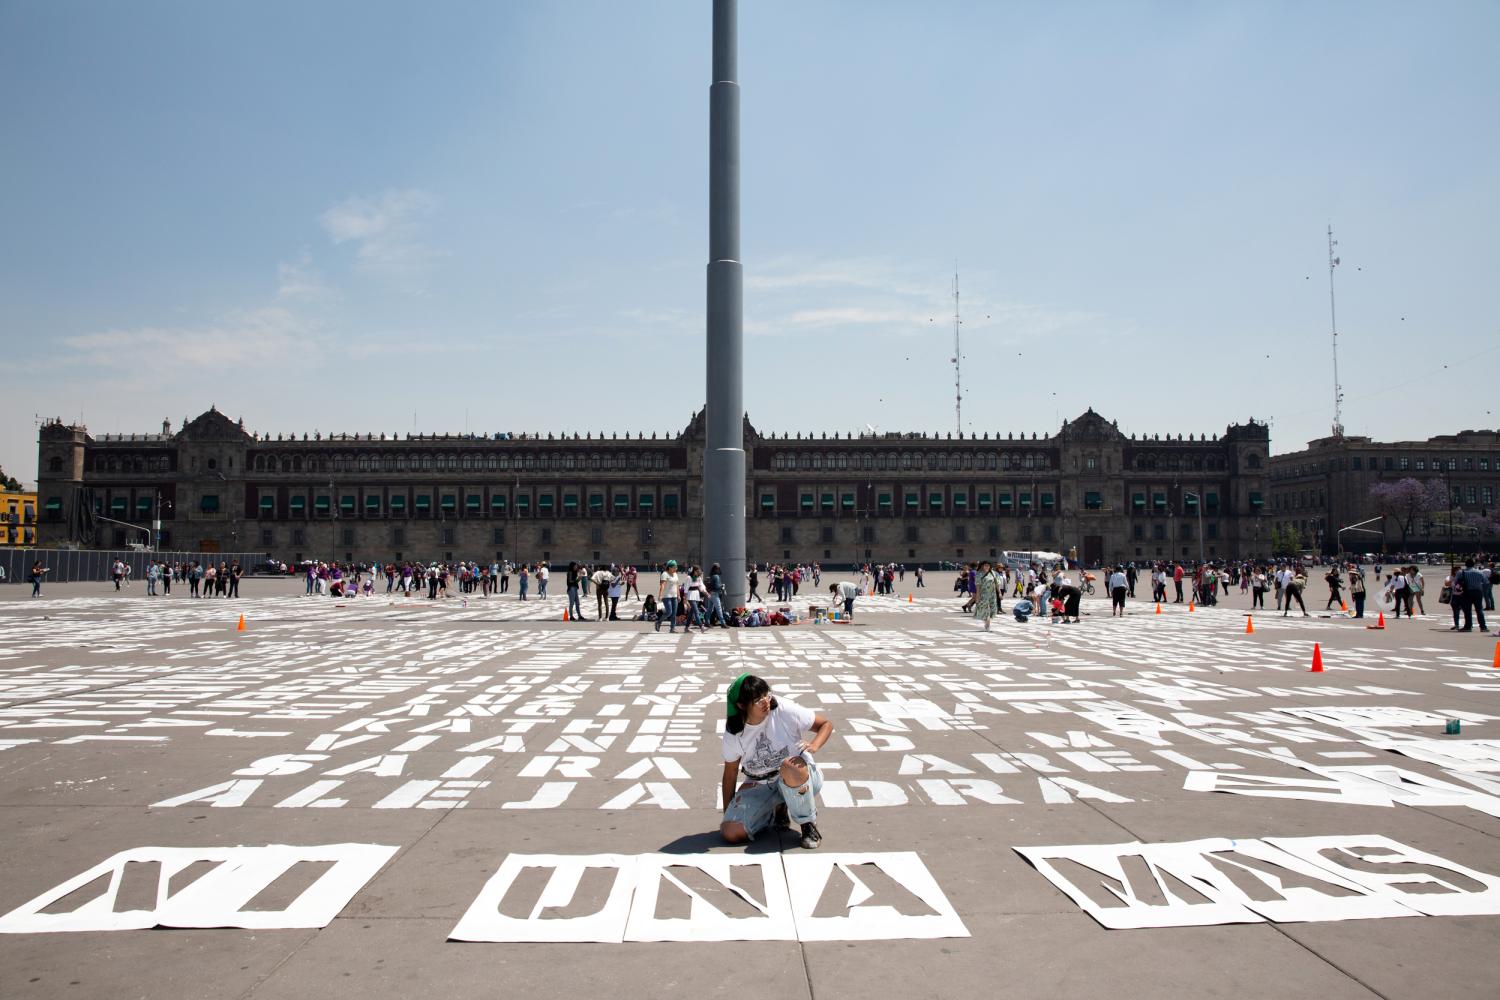 Women are painting the names of victims of femicide in front of Mexicos National Palace before a massive march to protest gender-based violence and inequality on International Womens Day at Zocalo Square in Mexico City, Mexico on March 8, 2020. According to government statistics, at least ten women are murdered every day in Mexico, making it one of the most dangerous countries in the world for girls and women. Femicides rates have doubled in the past five years in Mexico. Impunity is a major problem, 90 percent of cases go unsolved. After a series of brutal femicides, activists called for a national womens strike. On March 9, thousands of women and girls across Mexico are expected to stay home from works, schools and social media sites, in a mass strike called "A Day Without Us" to protest a rising wave of violence against women and what many call an unresponsive government. (Photo by Bénédicte Desrus/Sipa USA)No Use UK. No Use Germany.